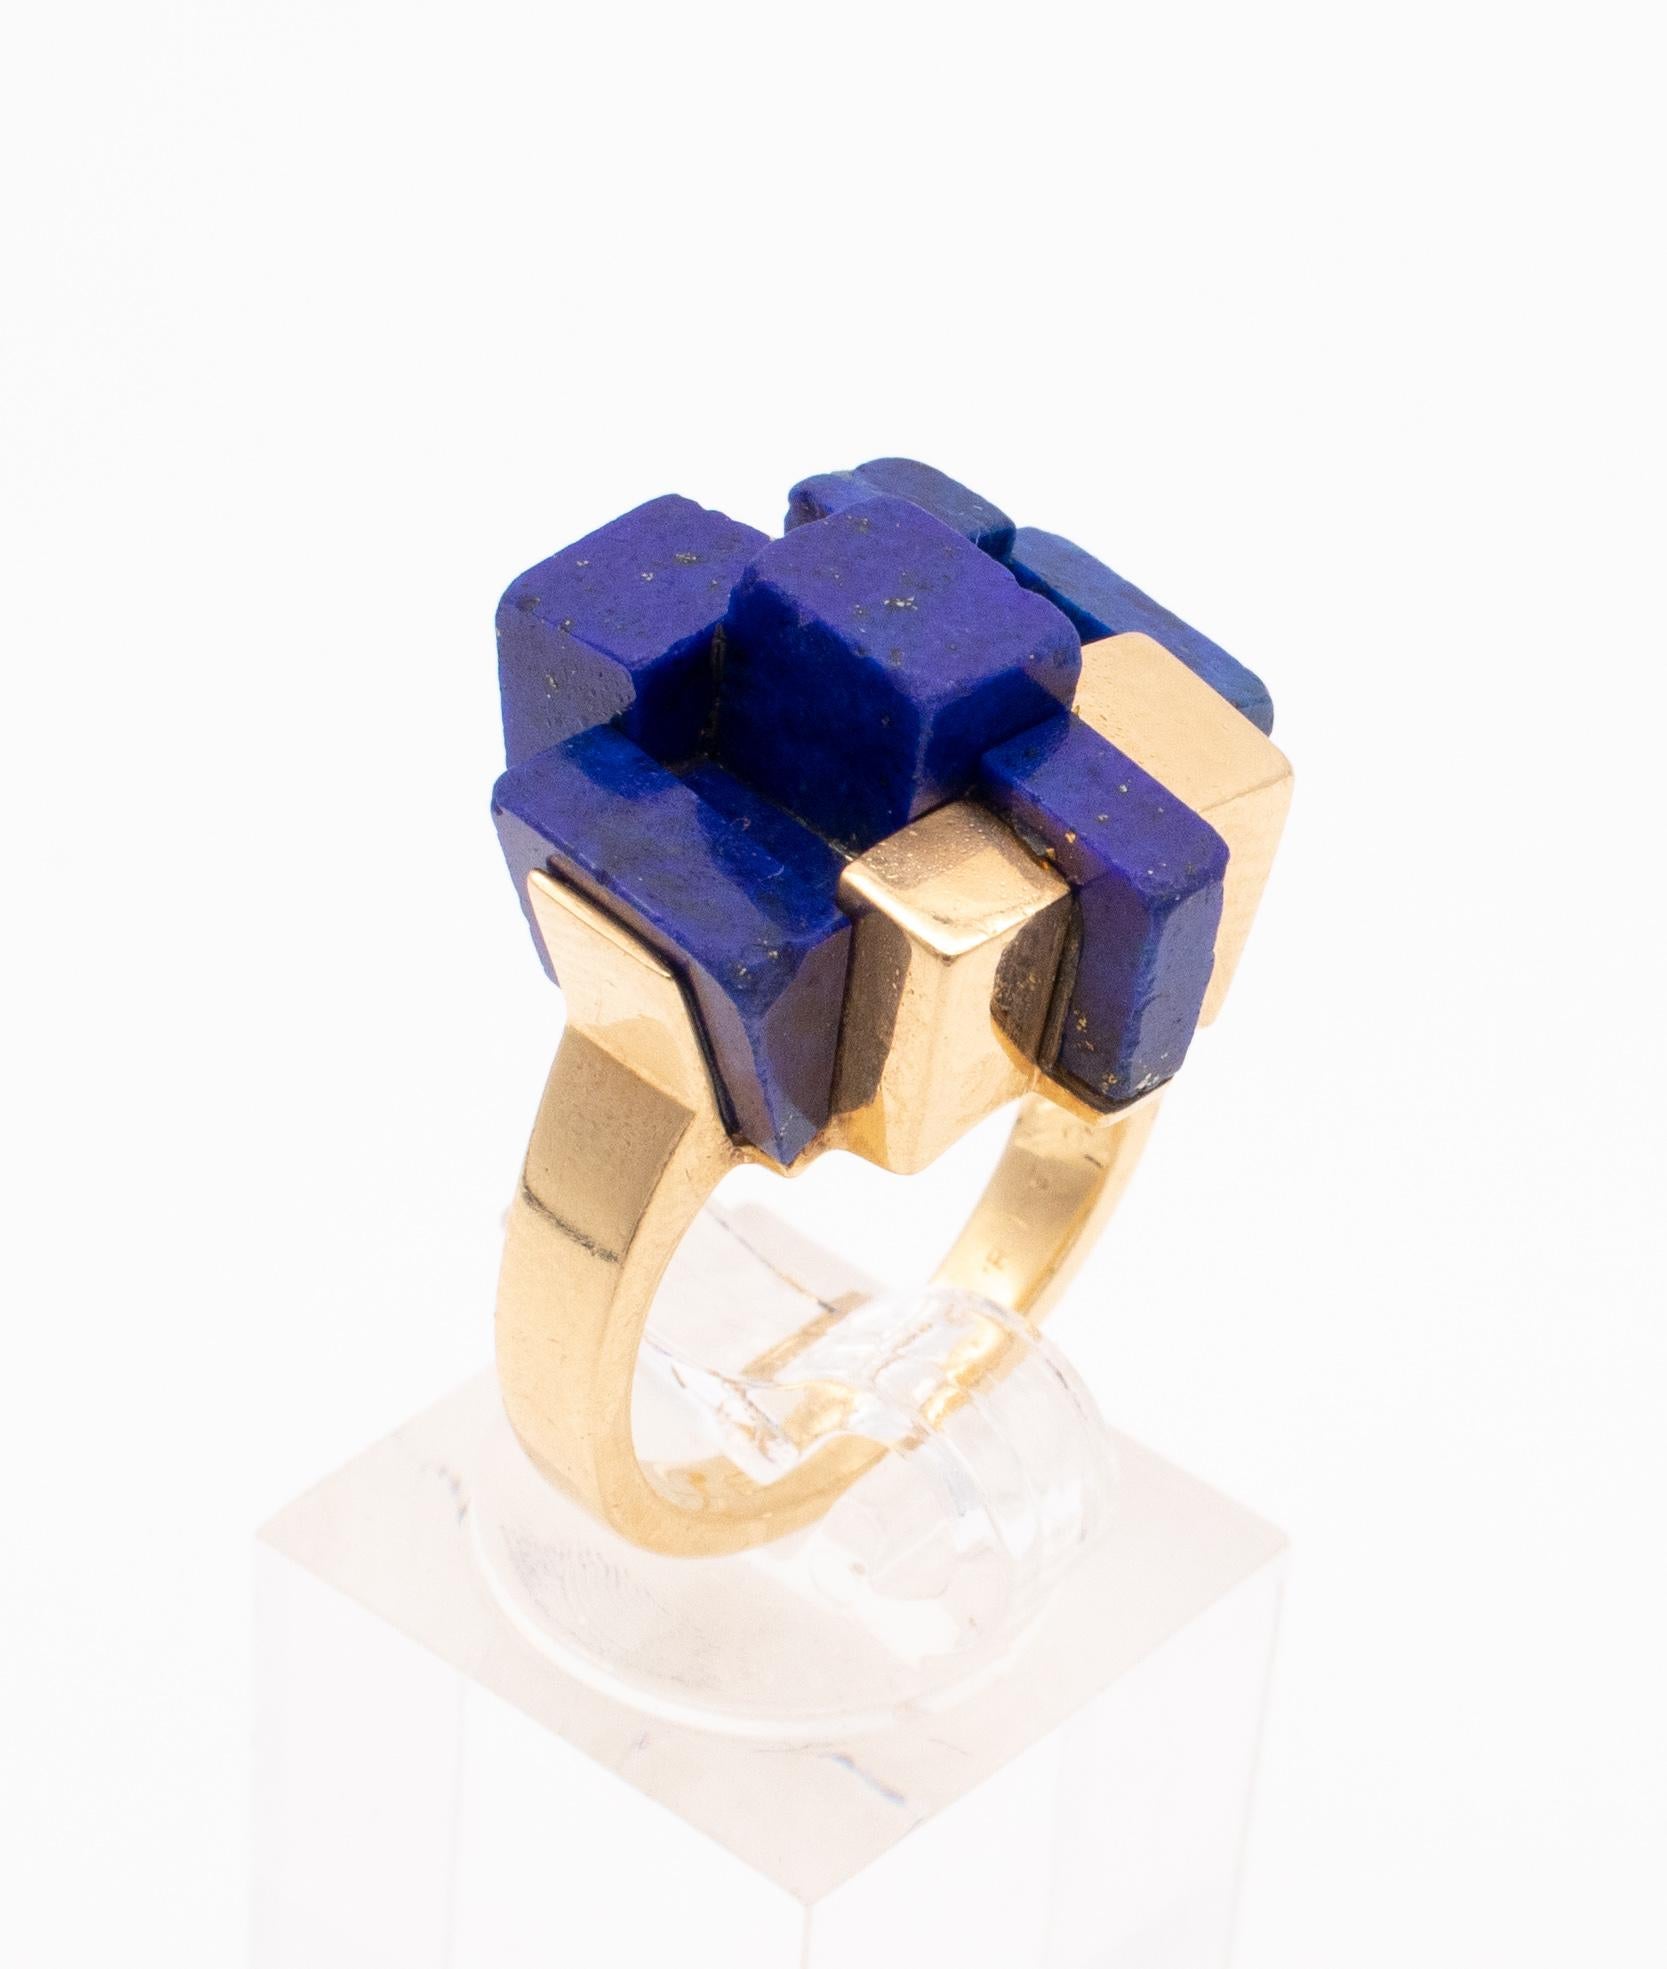 Mellerio 1970 Paris Rare Geometric 18Kt Yellow Gold Ring With Carved Lapis Lazul 1